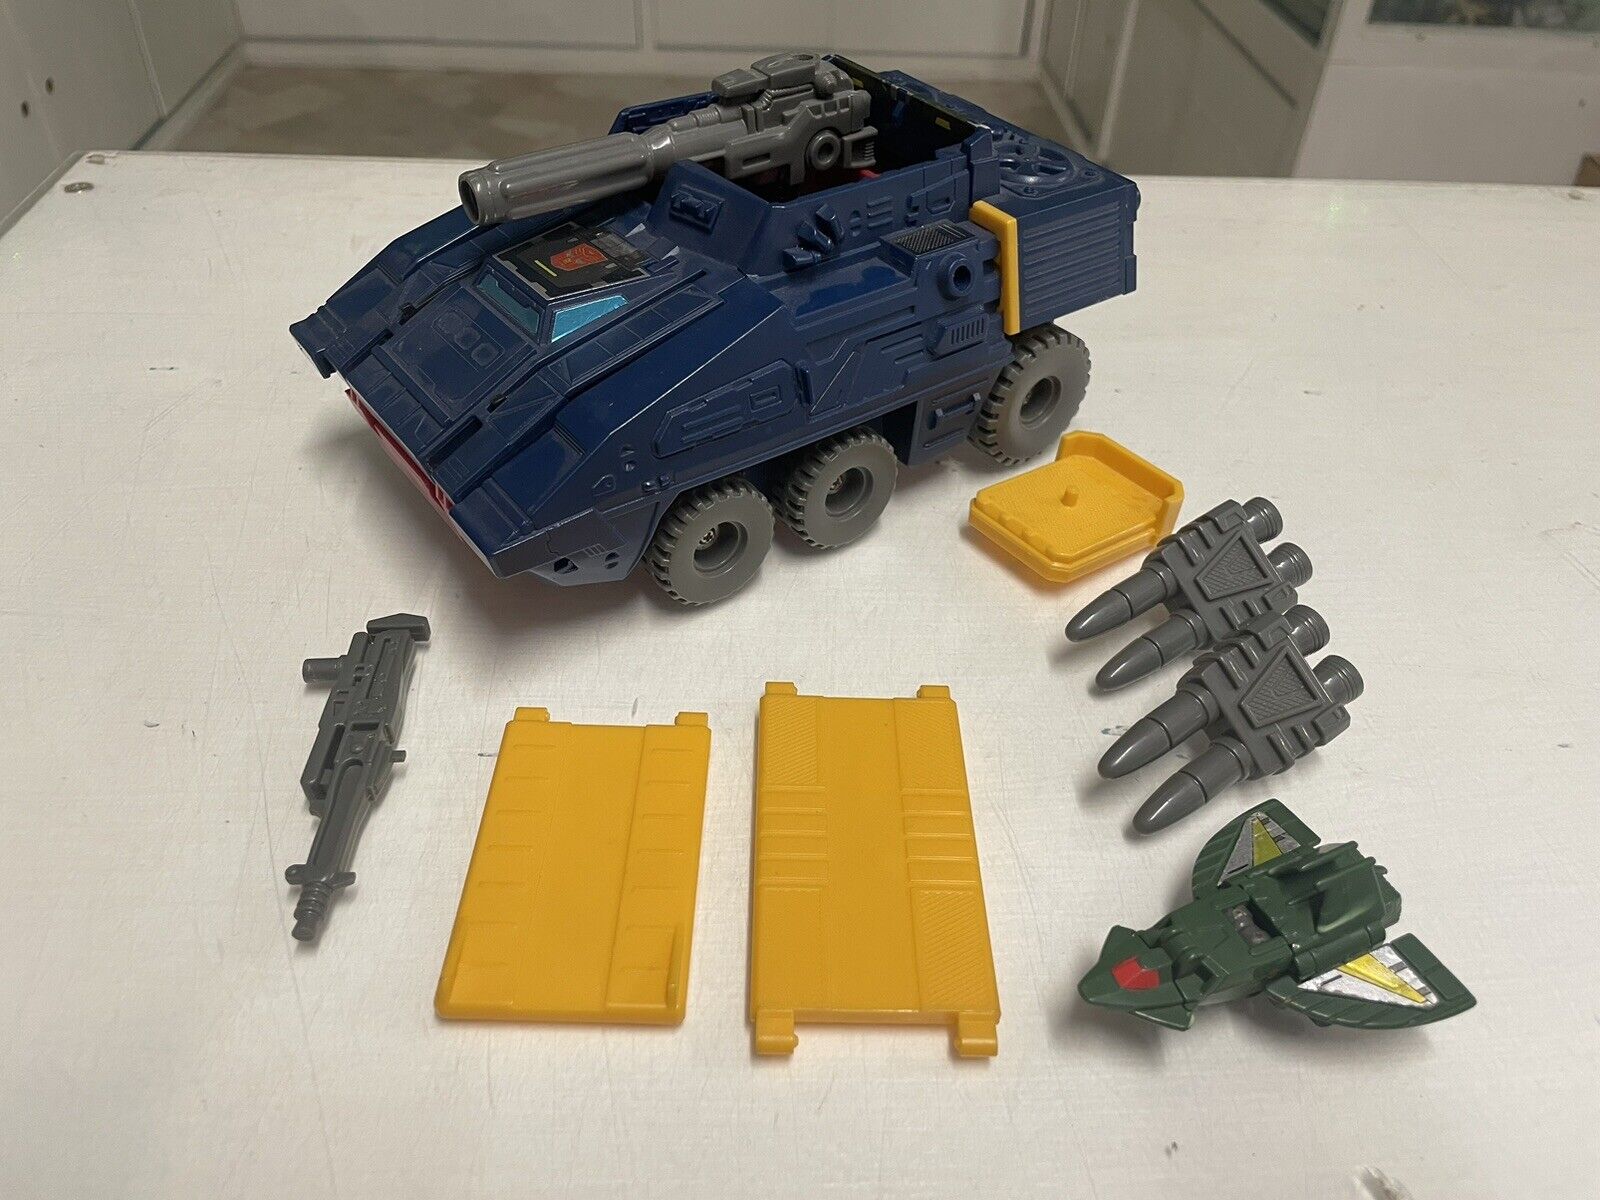 TRANSFORMERS-g1-Micromasters-Groundshaker-completo-144990617893